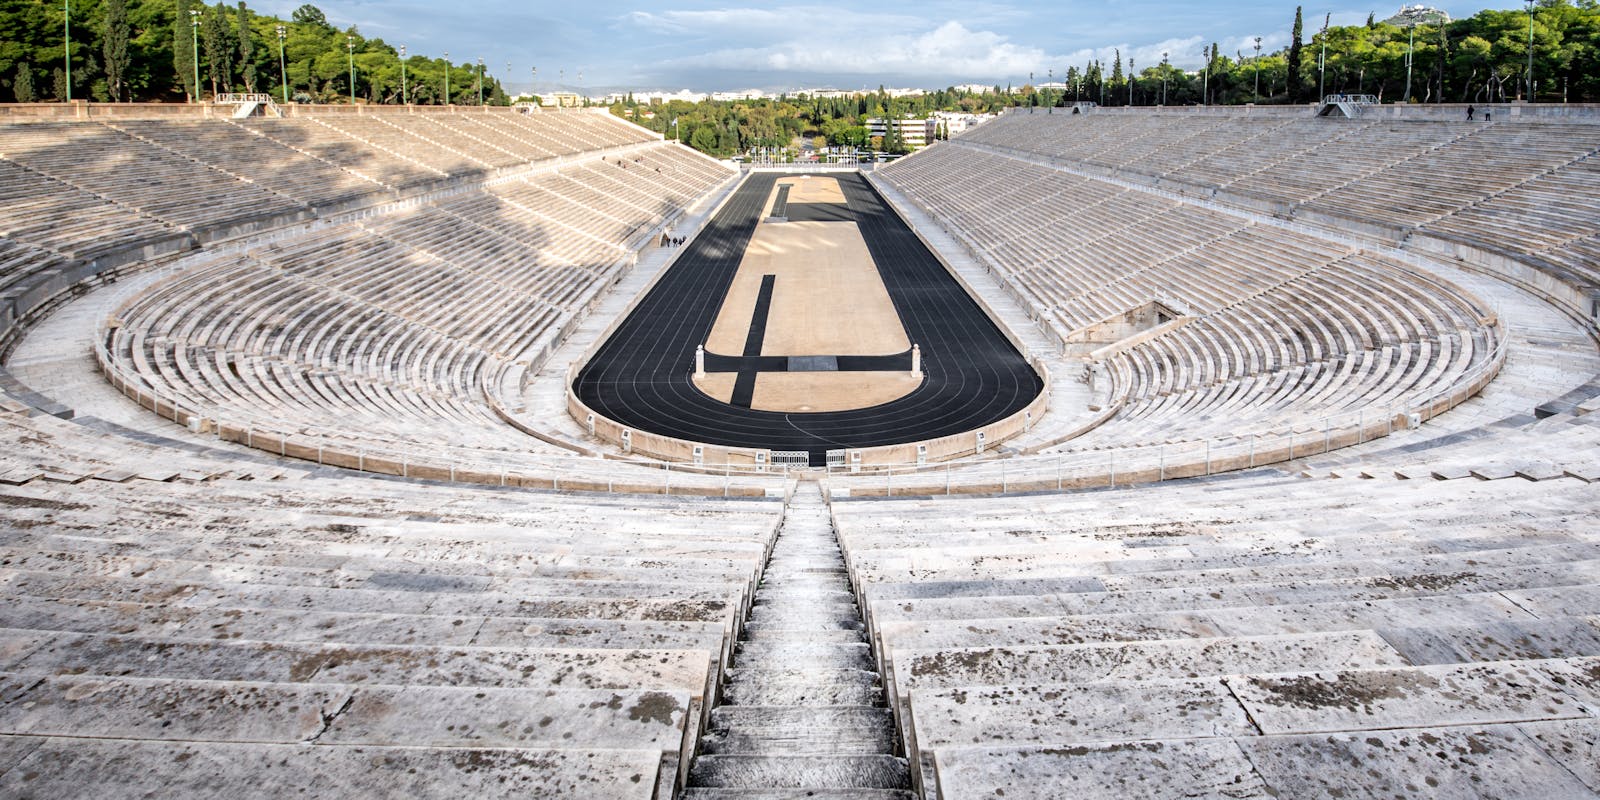 Olympia-Stadion in Athen | griechenland.de